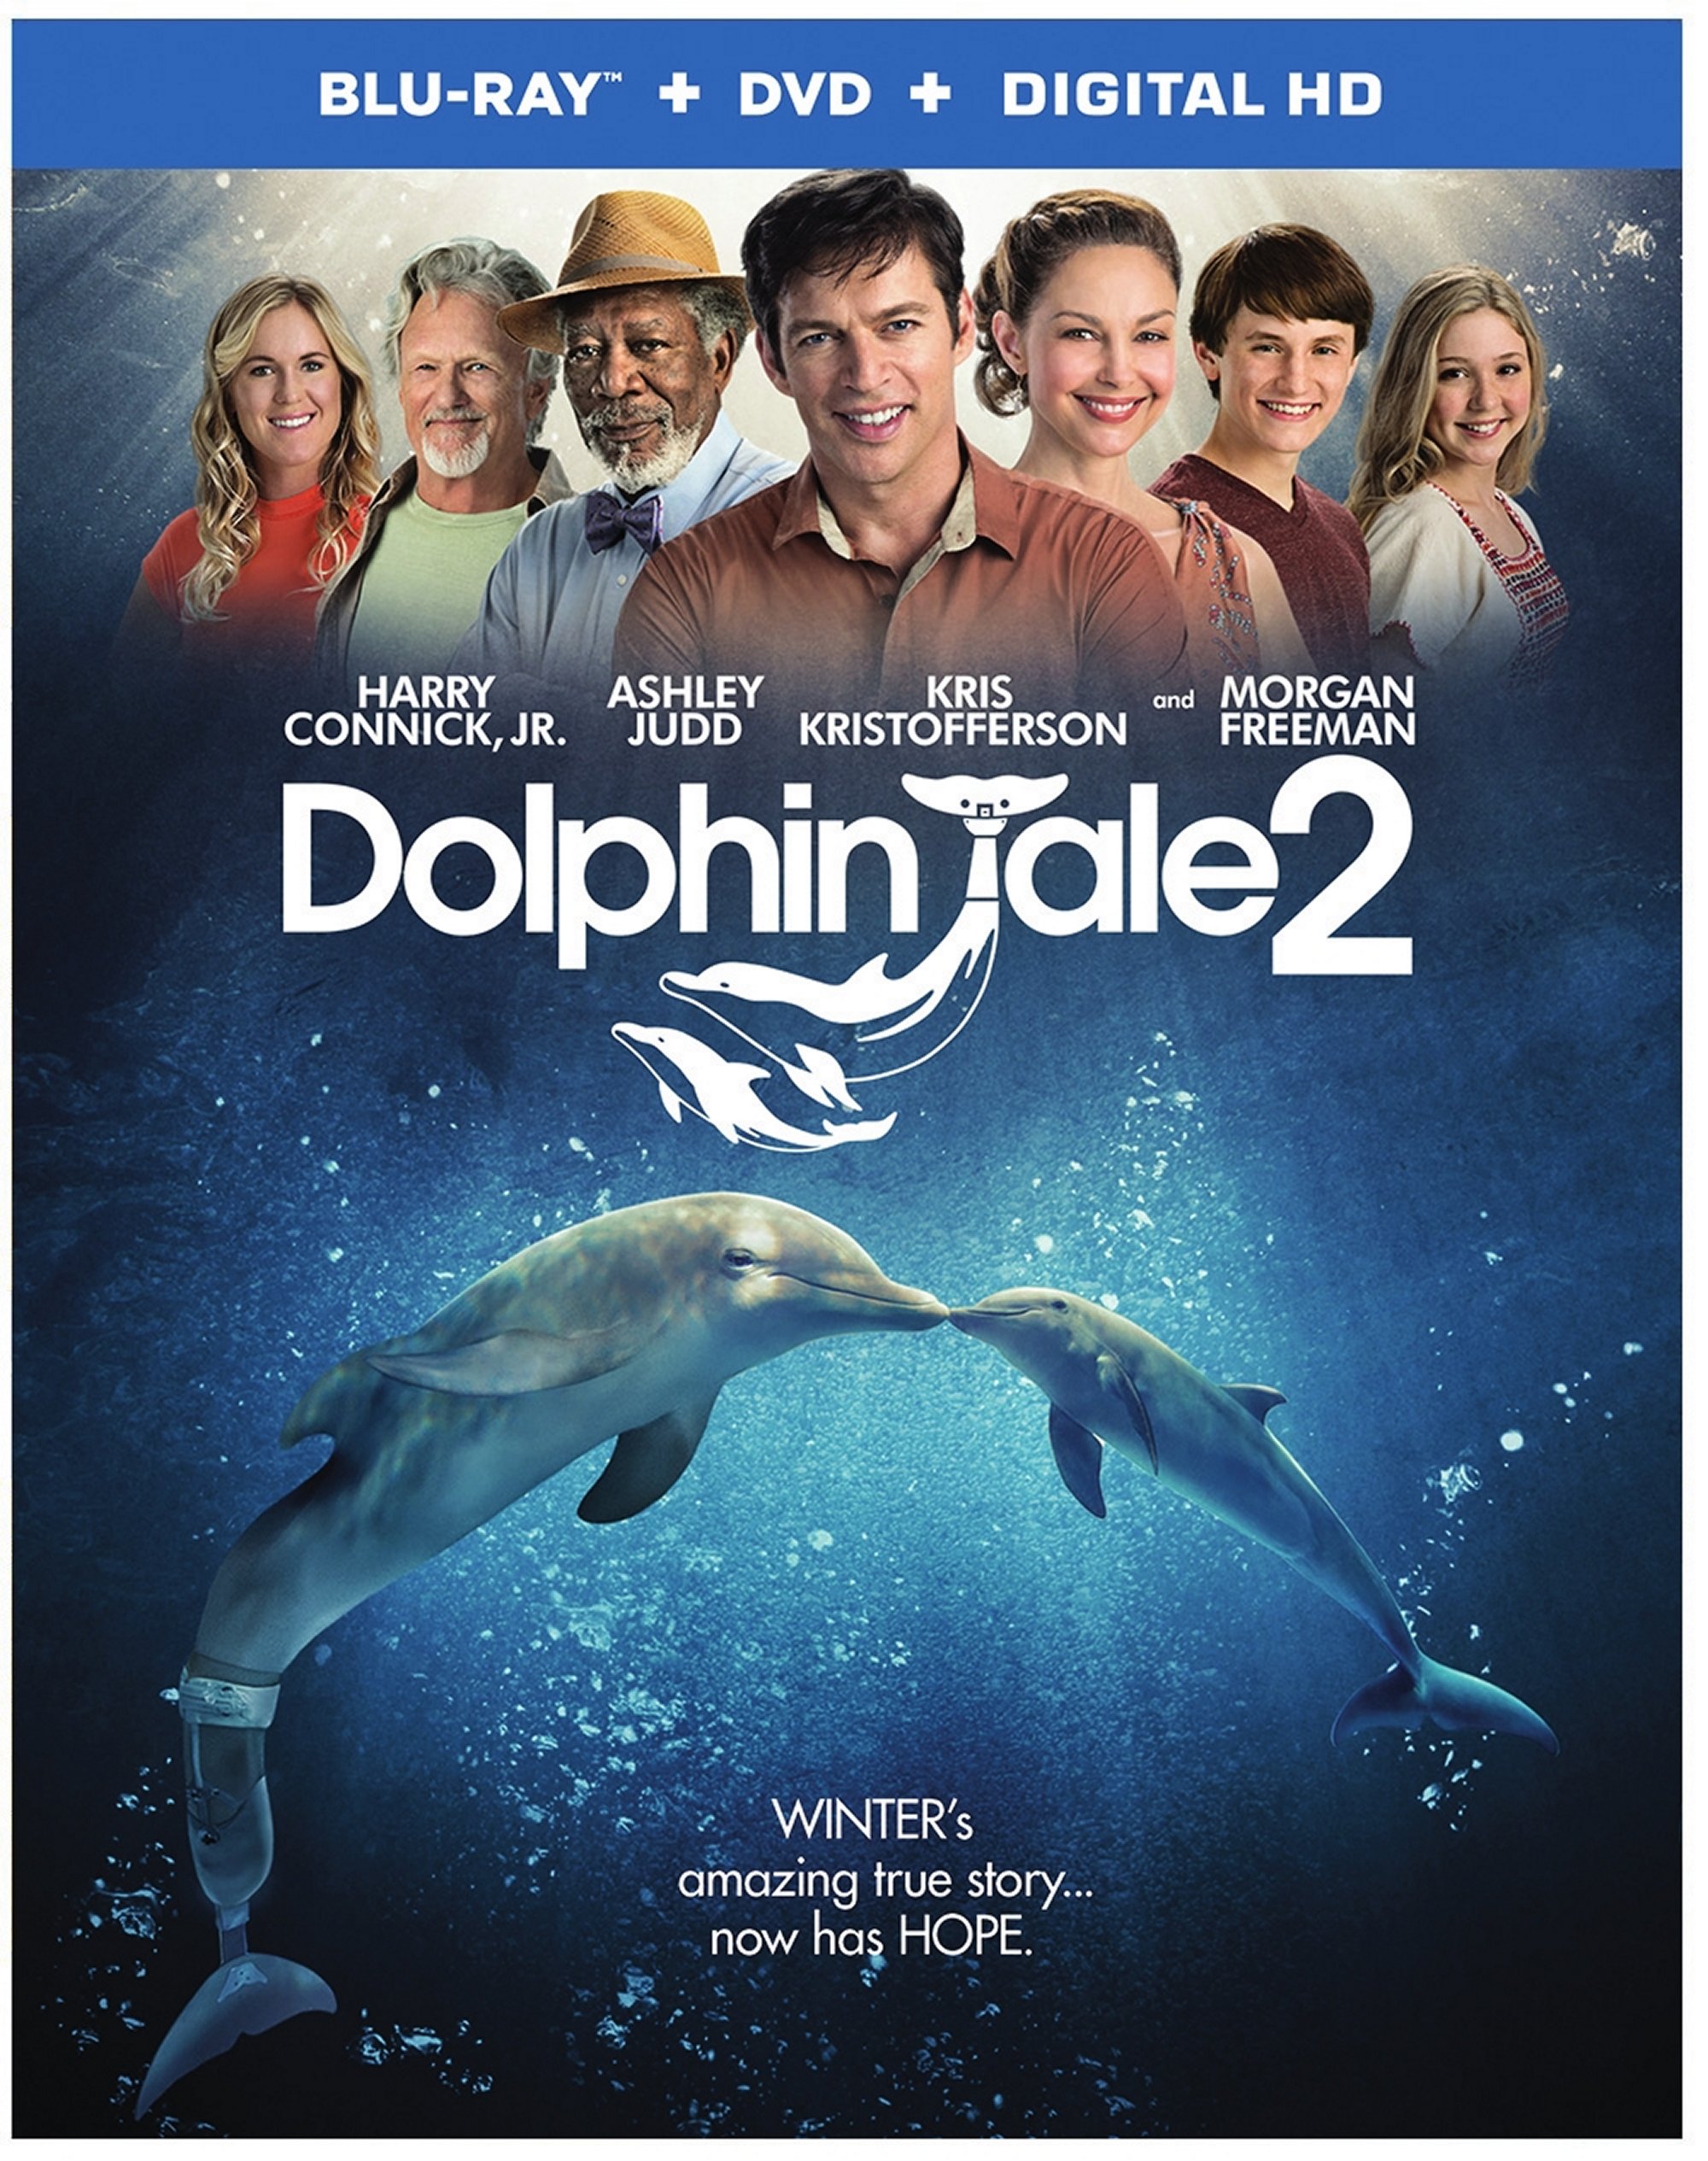 Dolphin Tale 2 Blu-ray Review